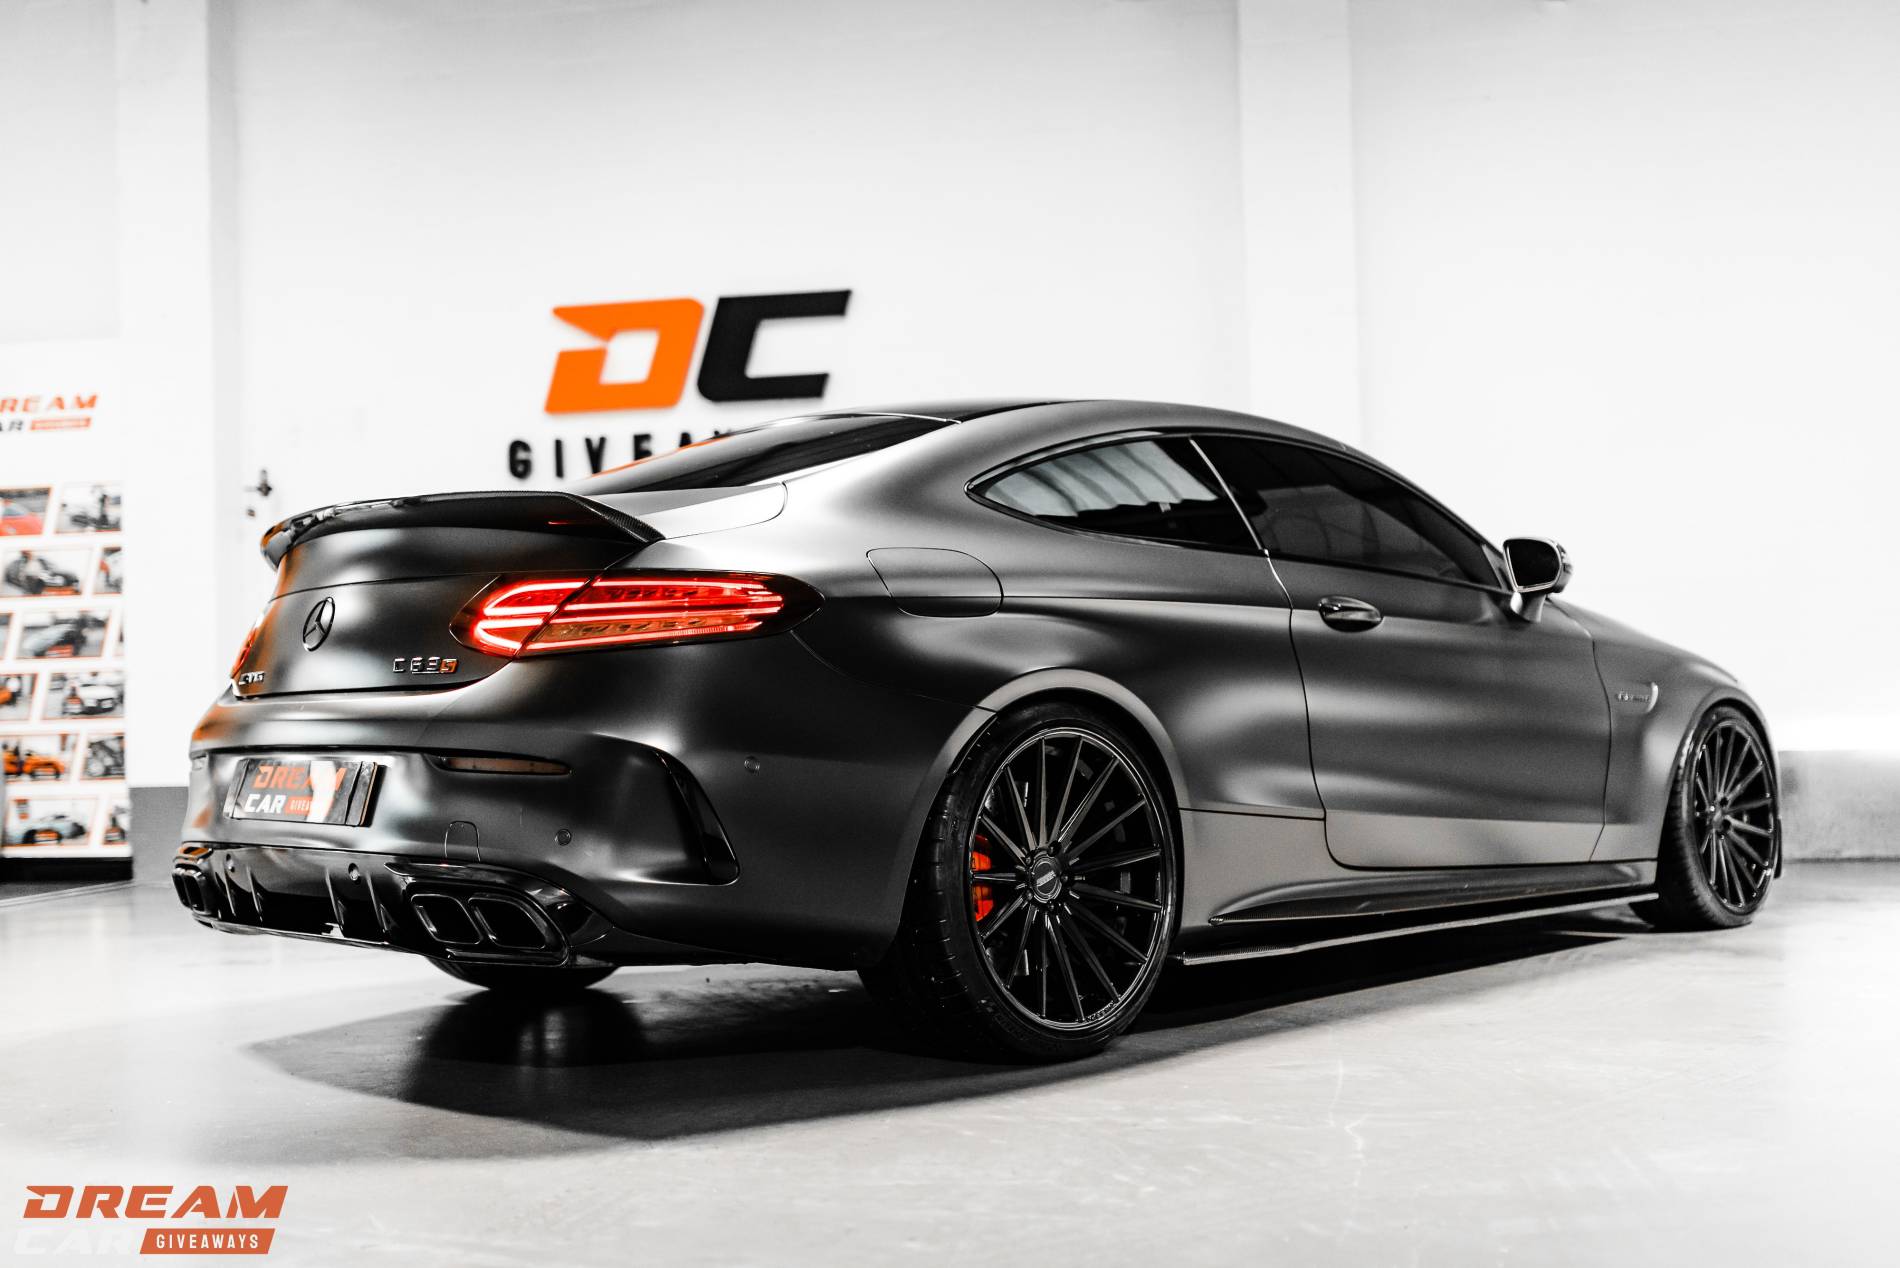 660HP Mercedes-Benz C63S AMG & £1500 or £43,000 Tax Free